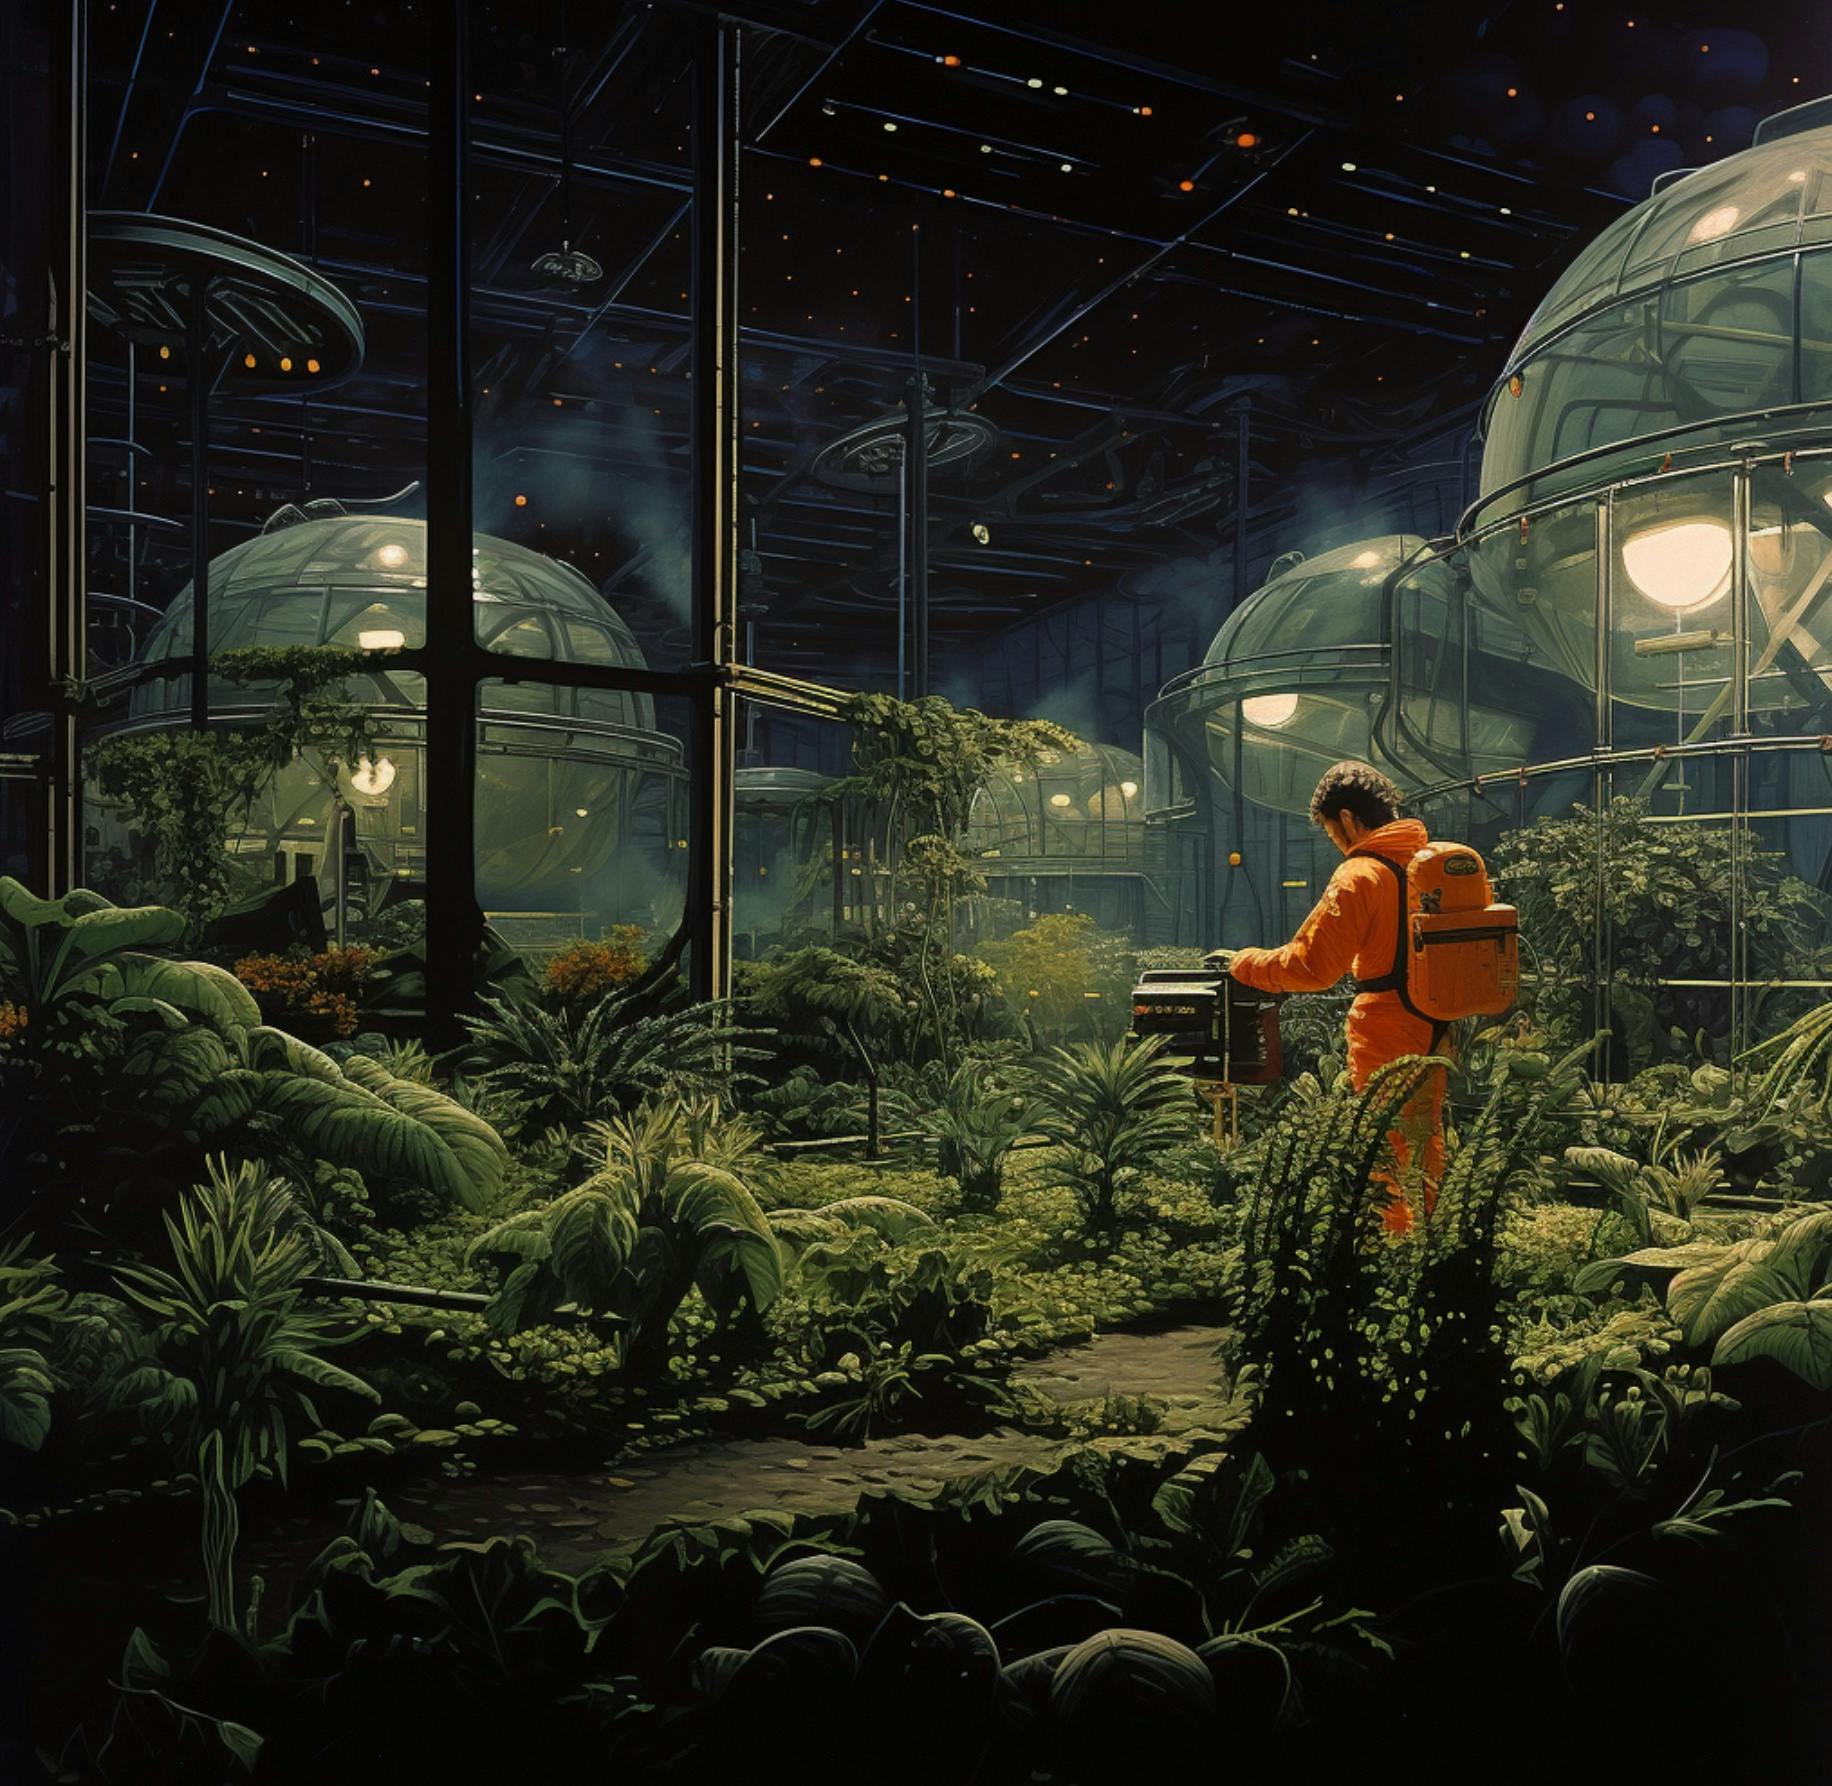 Astronaut attending to a spaceship greenhouse